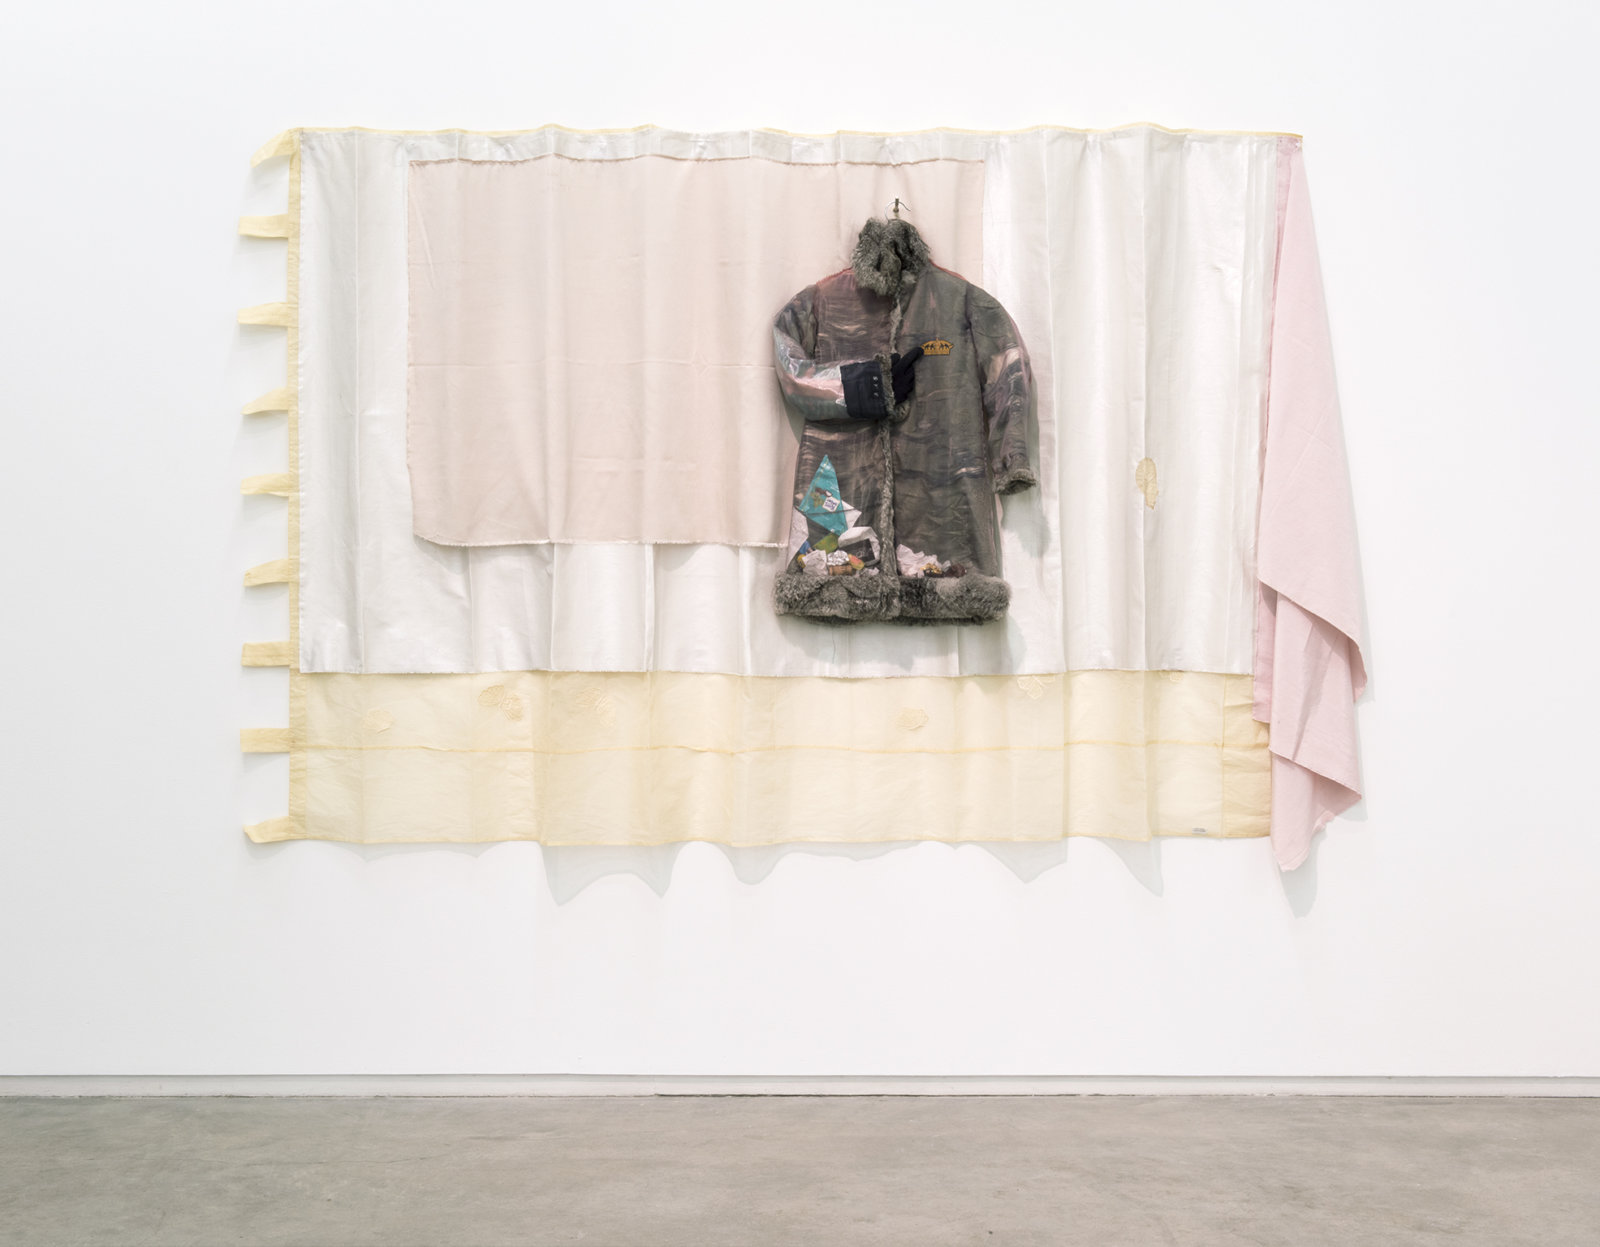 Liz Magor, Study for a Farce, 2012, textile, fur, found objects, 60 x 96 x 8 in. (152 x 244 x 20 cm)